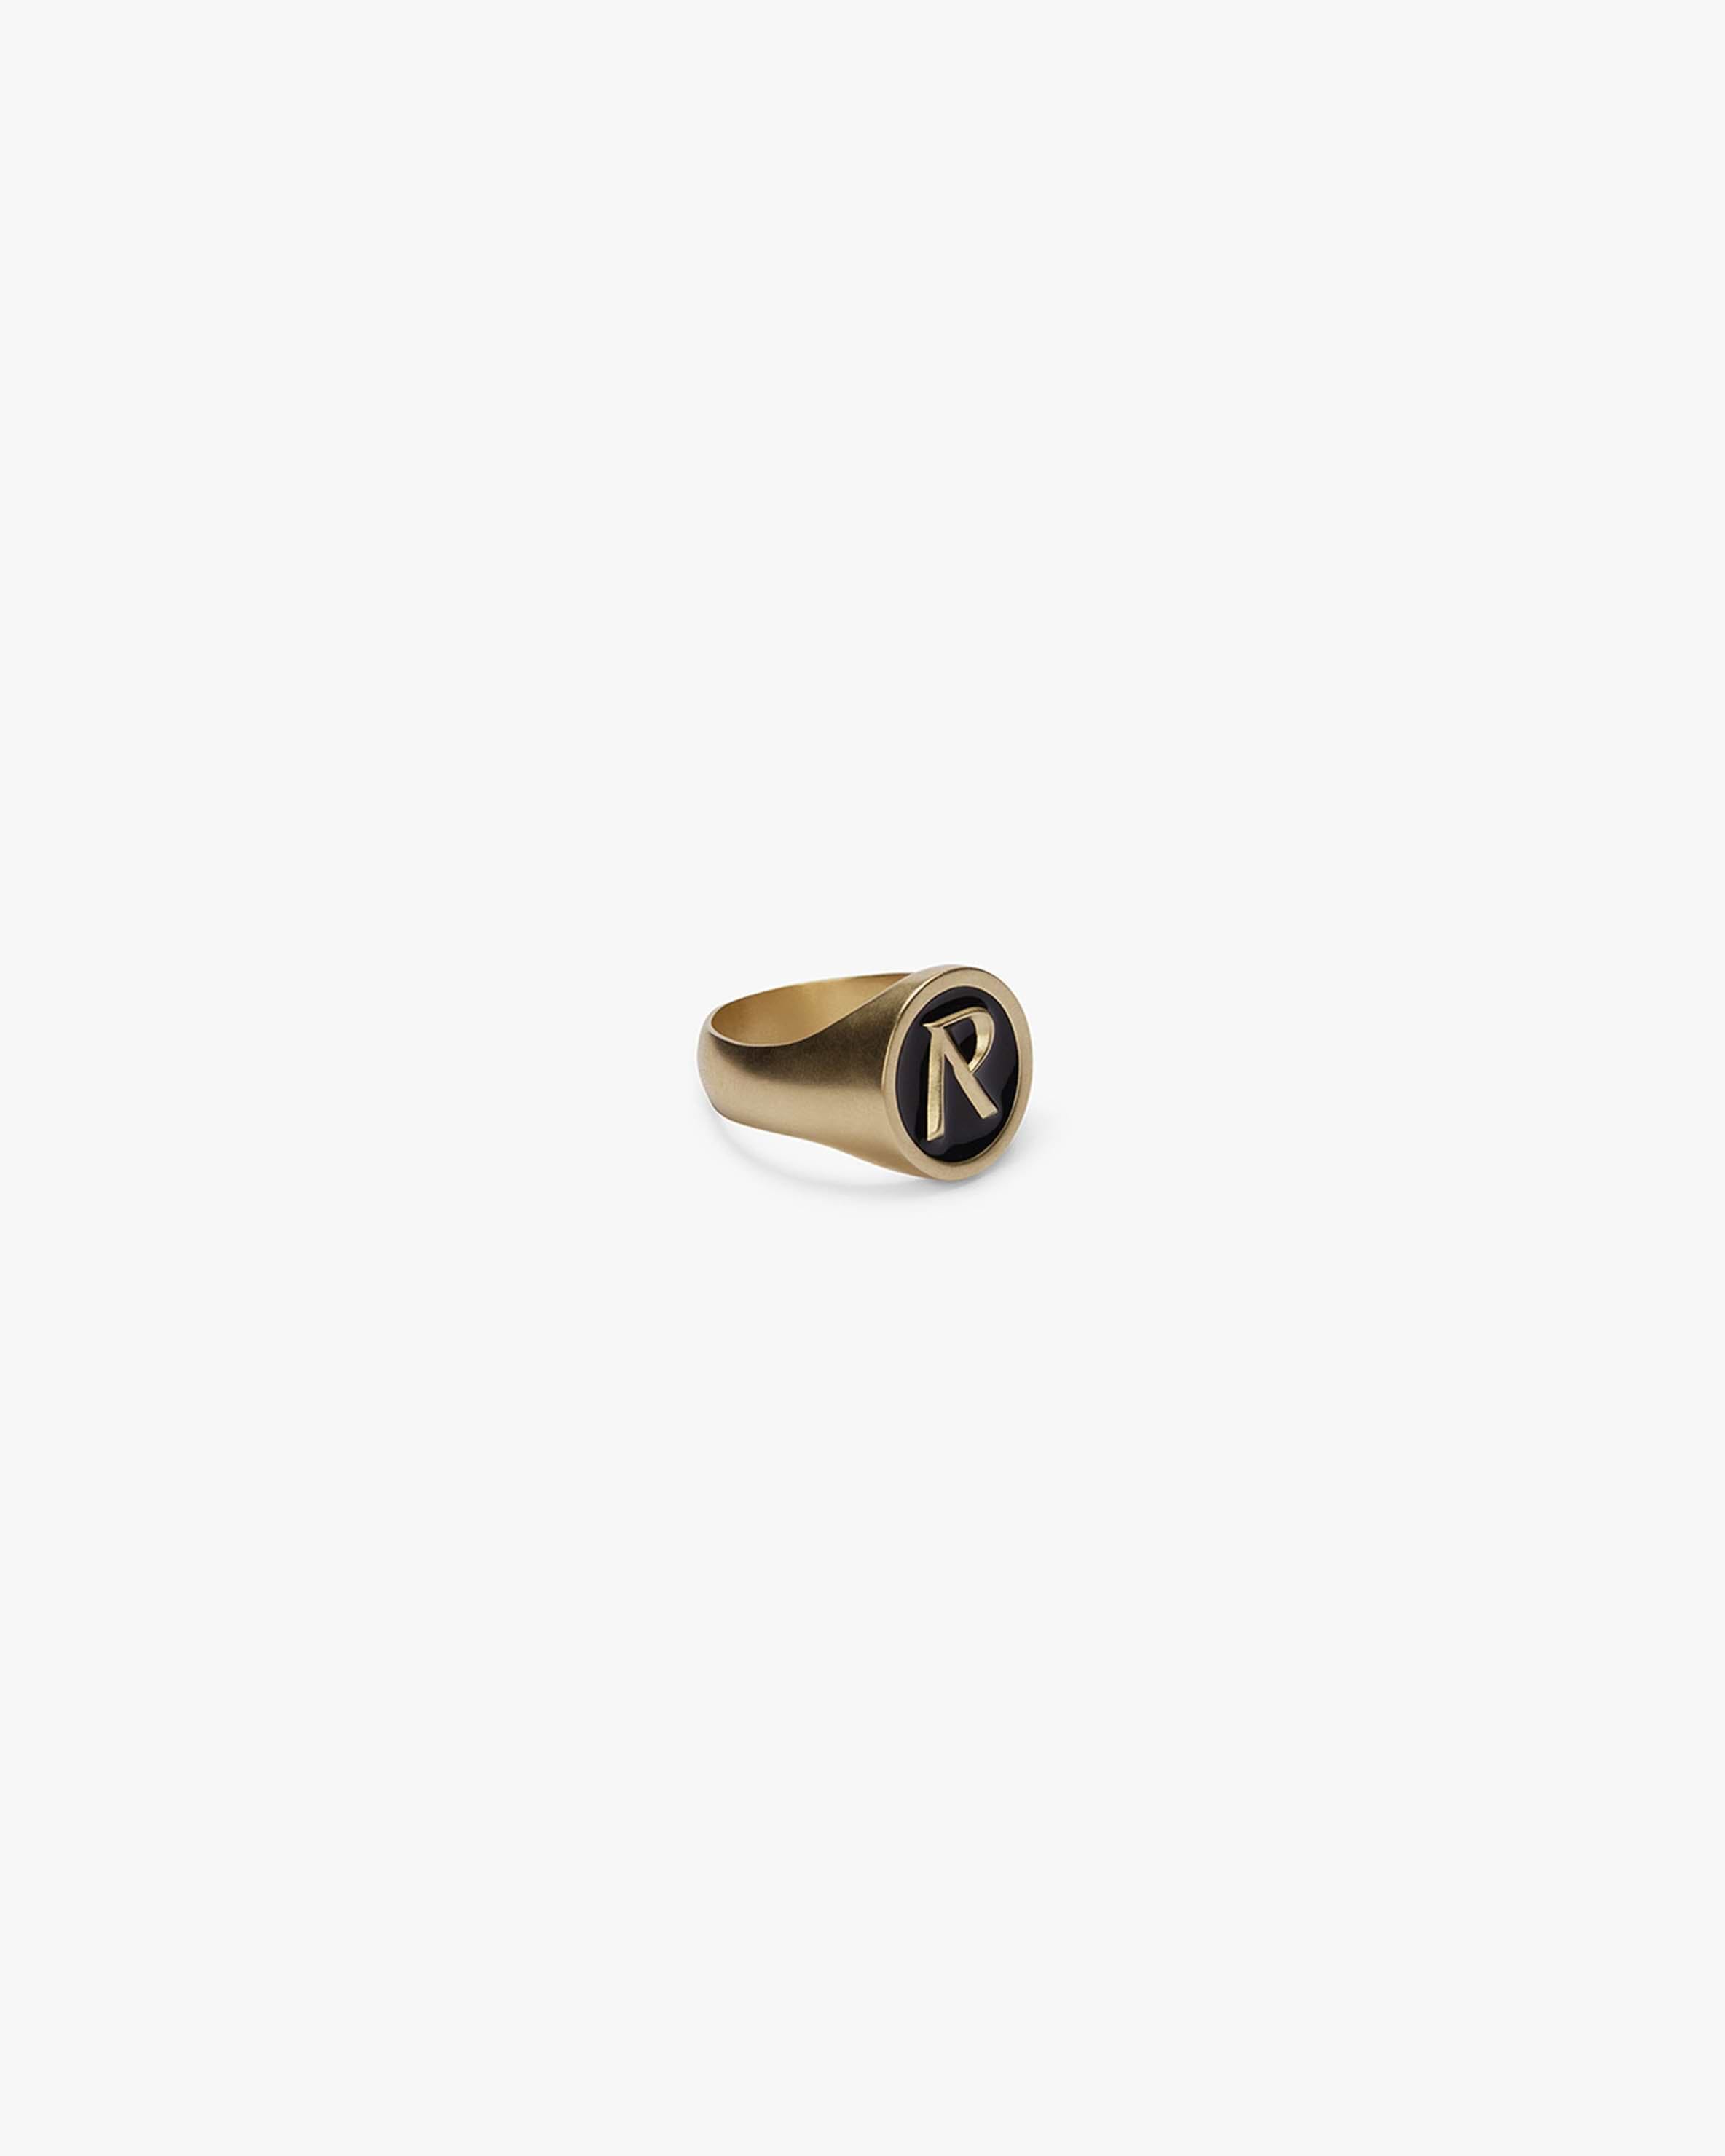 Gold-plated Signet Ring Monogram with Initials, Calligraphy font, Silver  925 and enamel